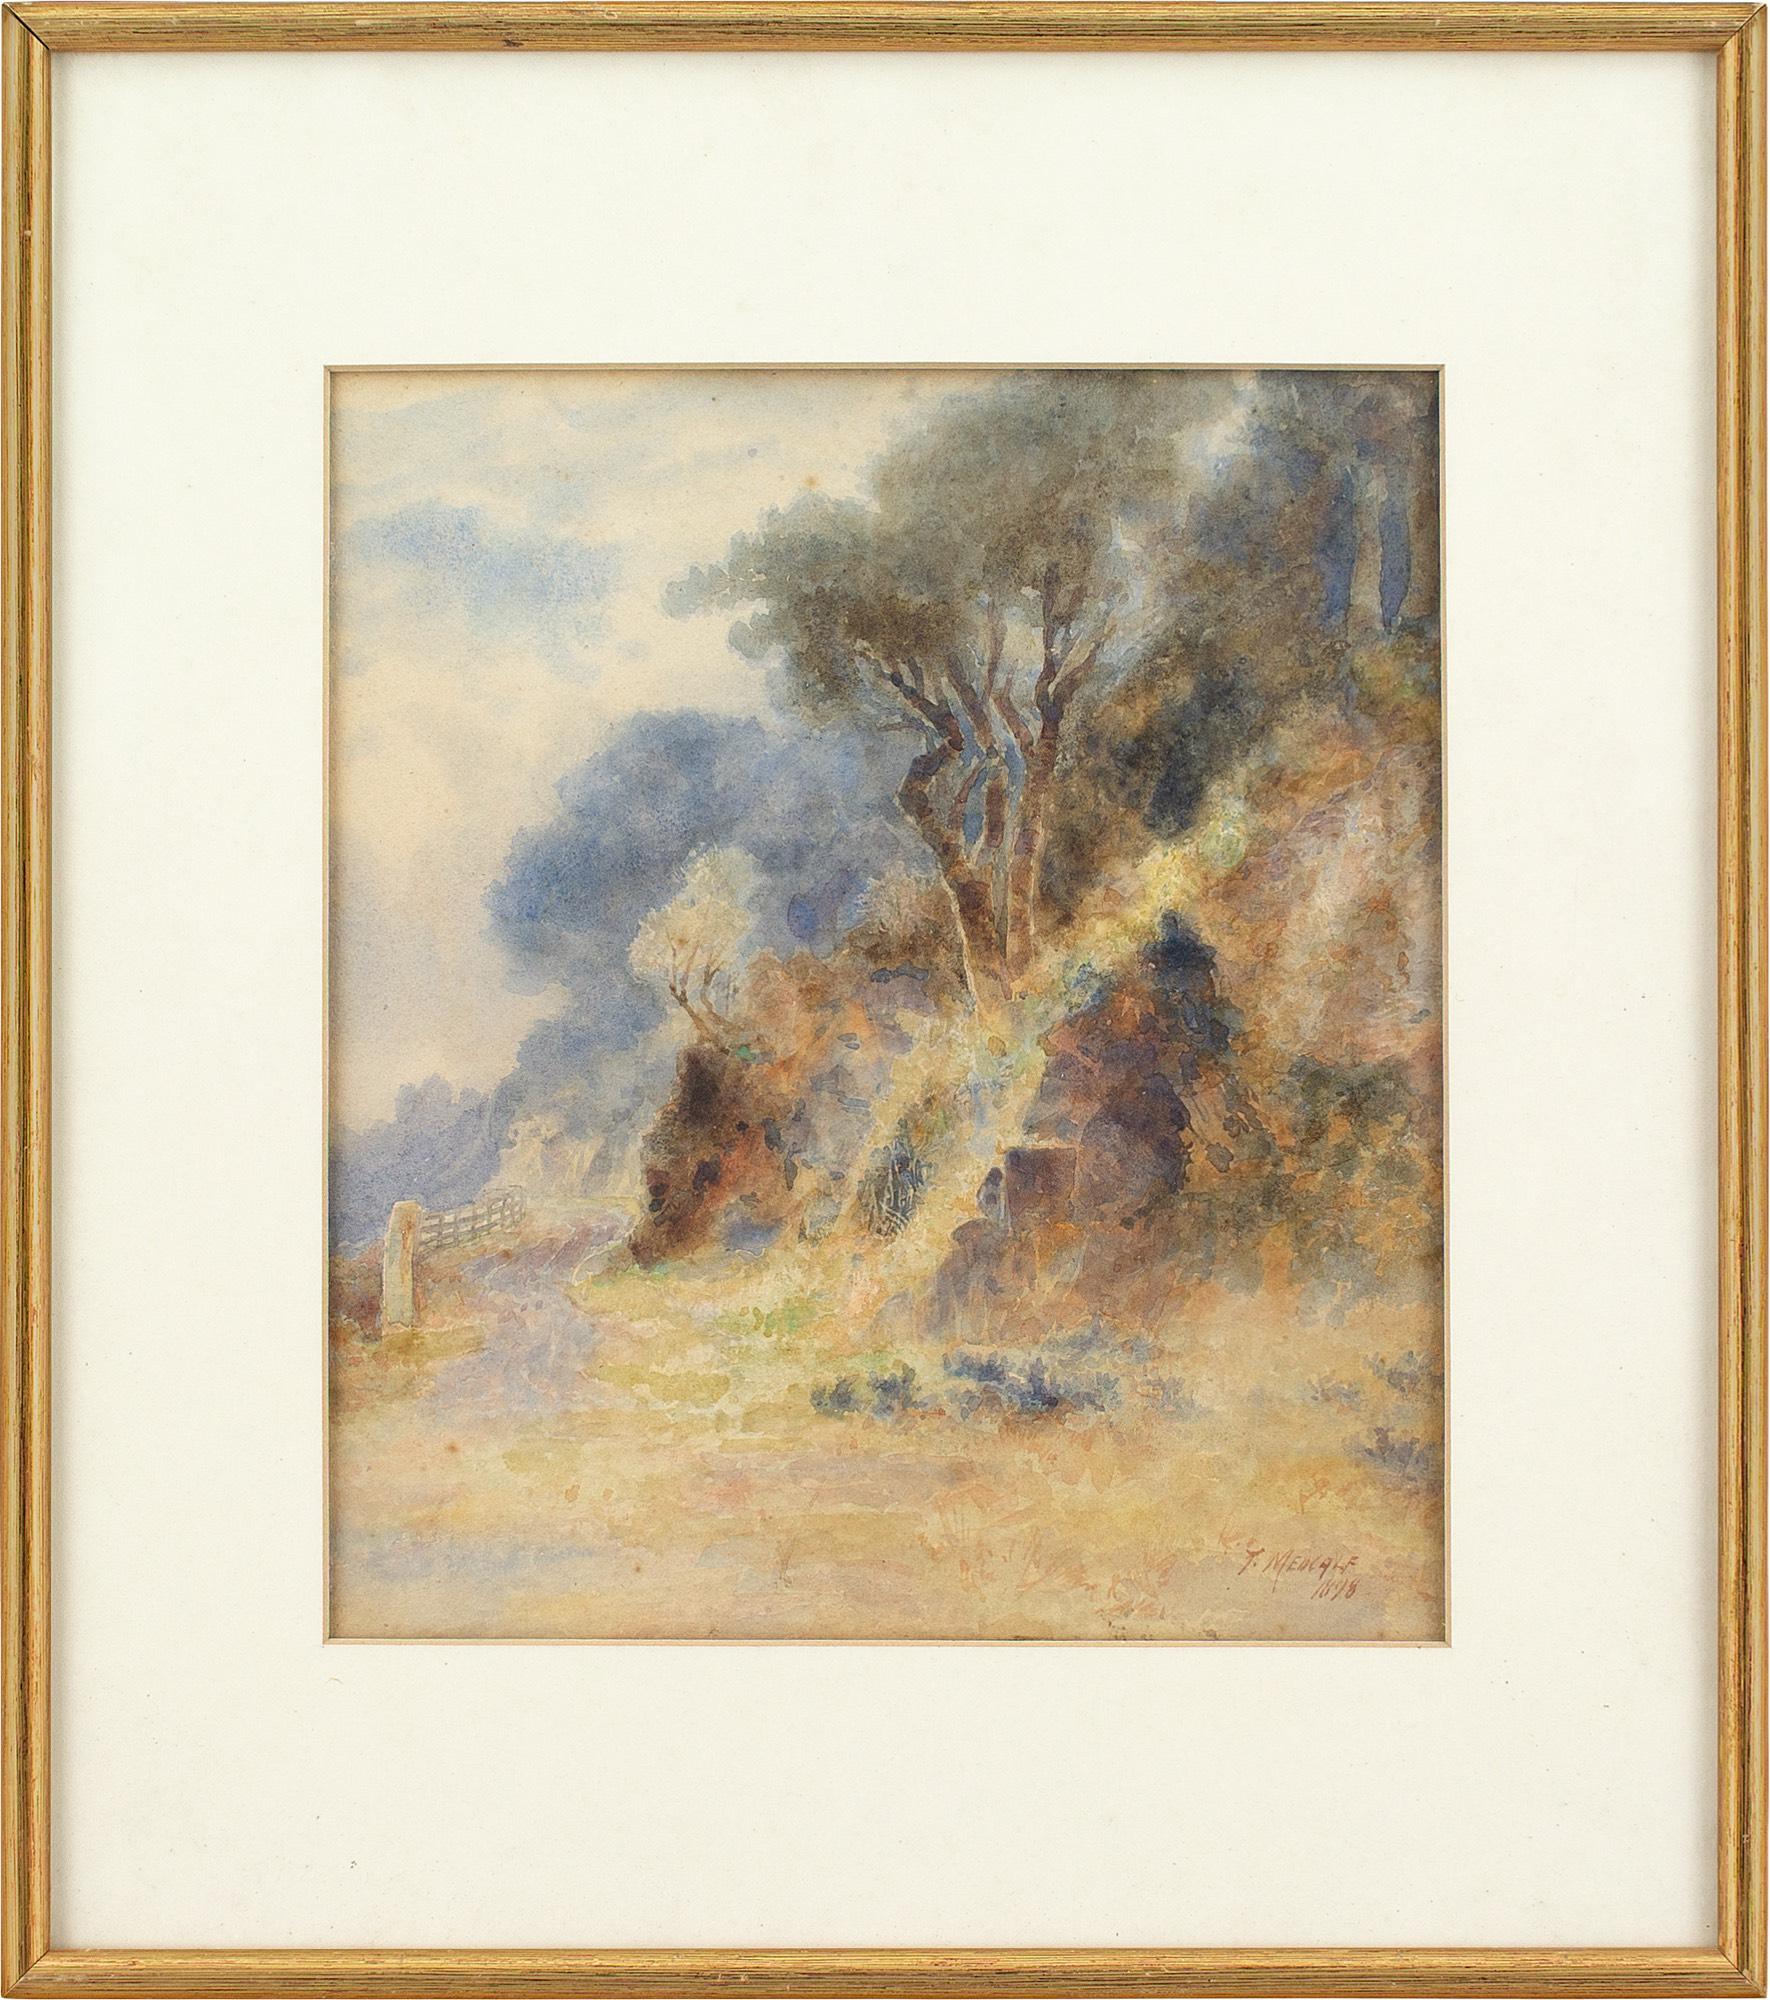 This late 19th-century watercolour by British artist Thomas Medcalf (1848-1901) depicts a rugged landscape with track.

Ascending beyond view, the mountainous terrain is punctuated by spindly trees as the flora climbs over a craggy facade. While the